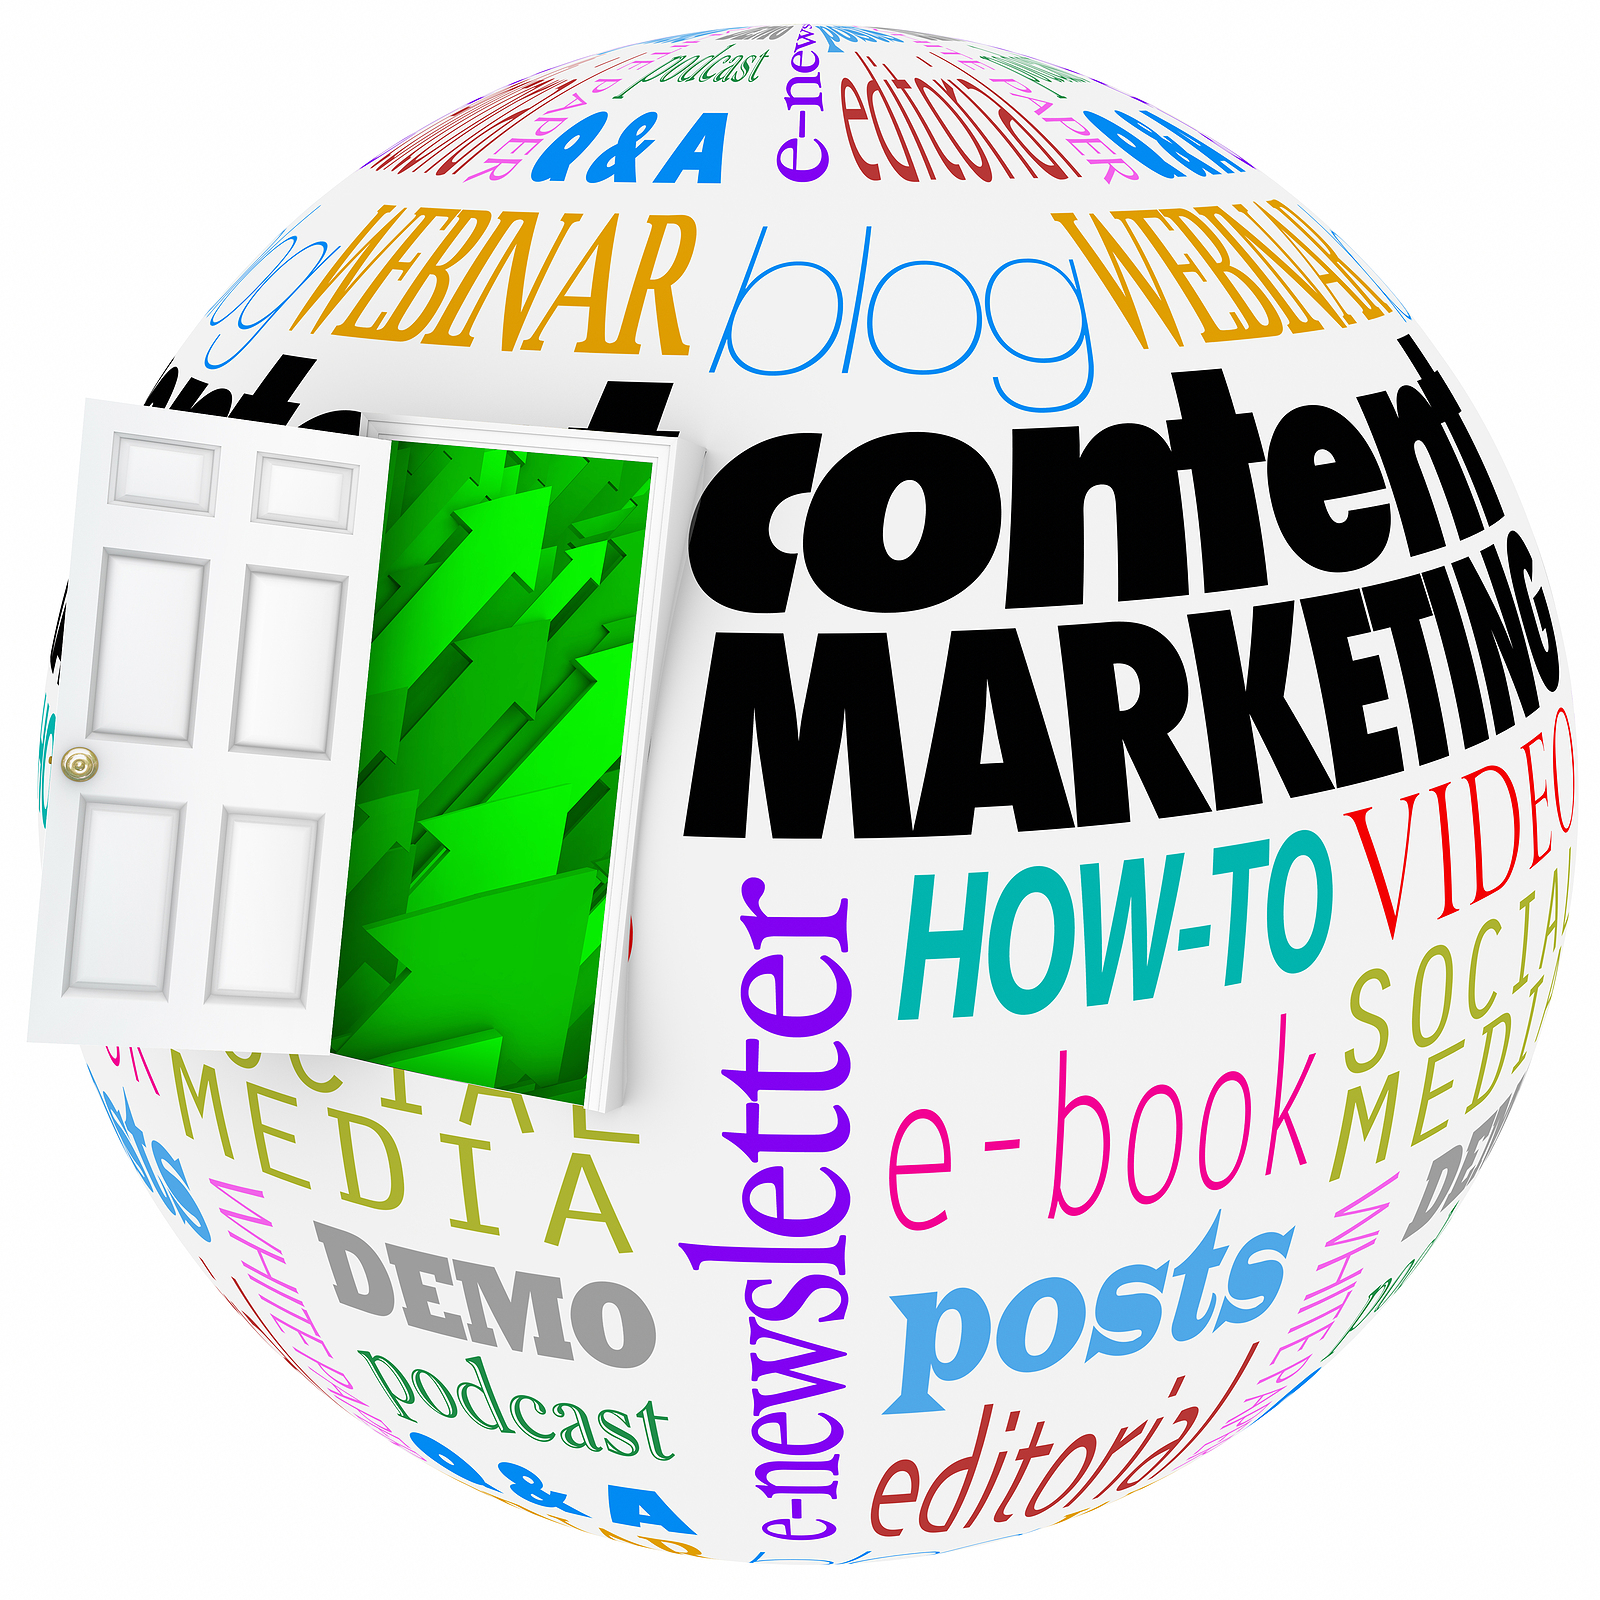 Content marketing for manufacturing companies